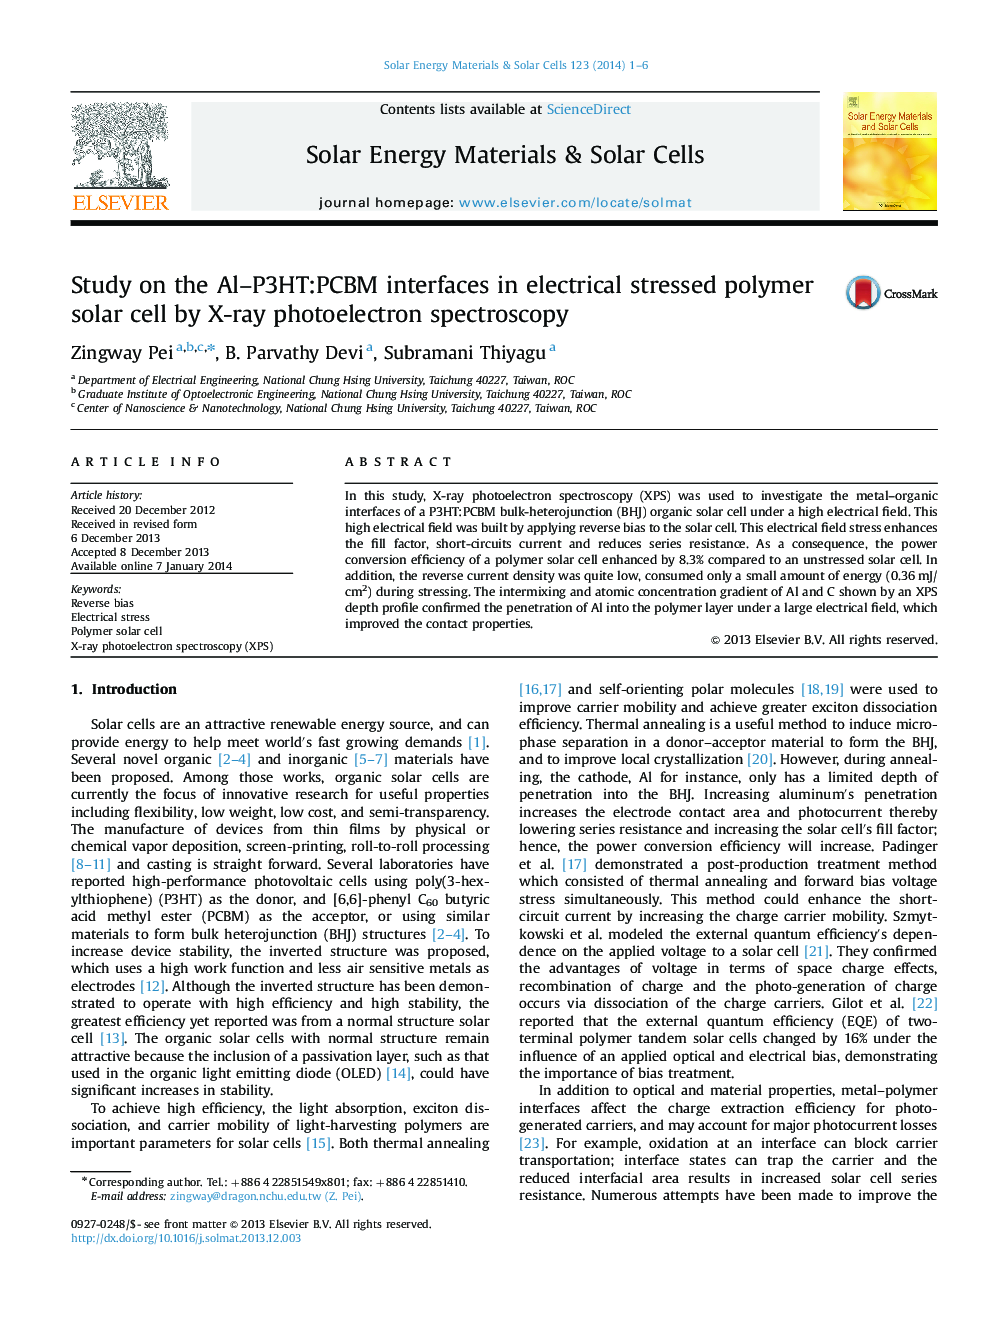 Study on the Al–P3HT:PCBM interfaces in electrical stressed polymer solar cell by X-ray photoelectron spectroscopy